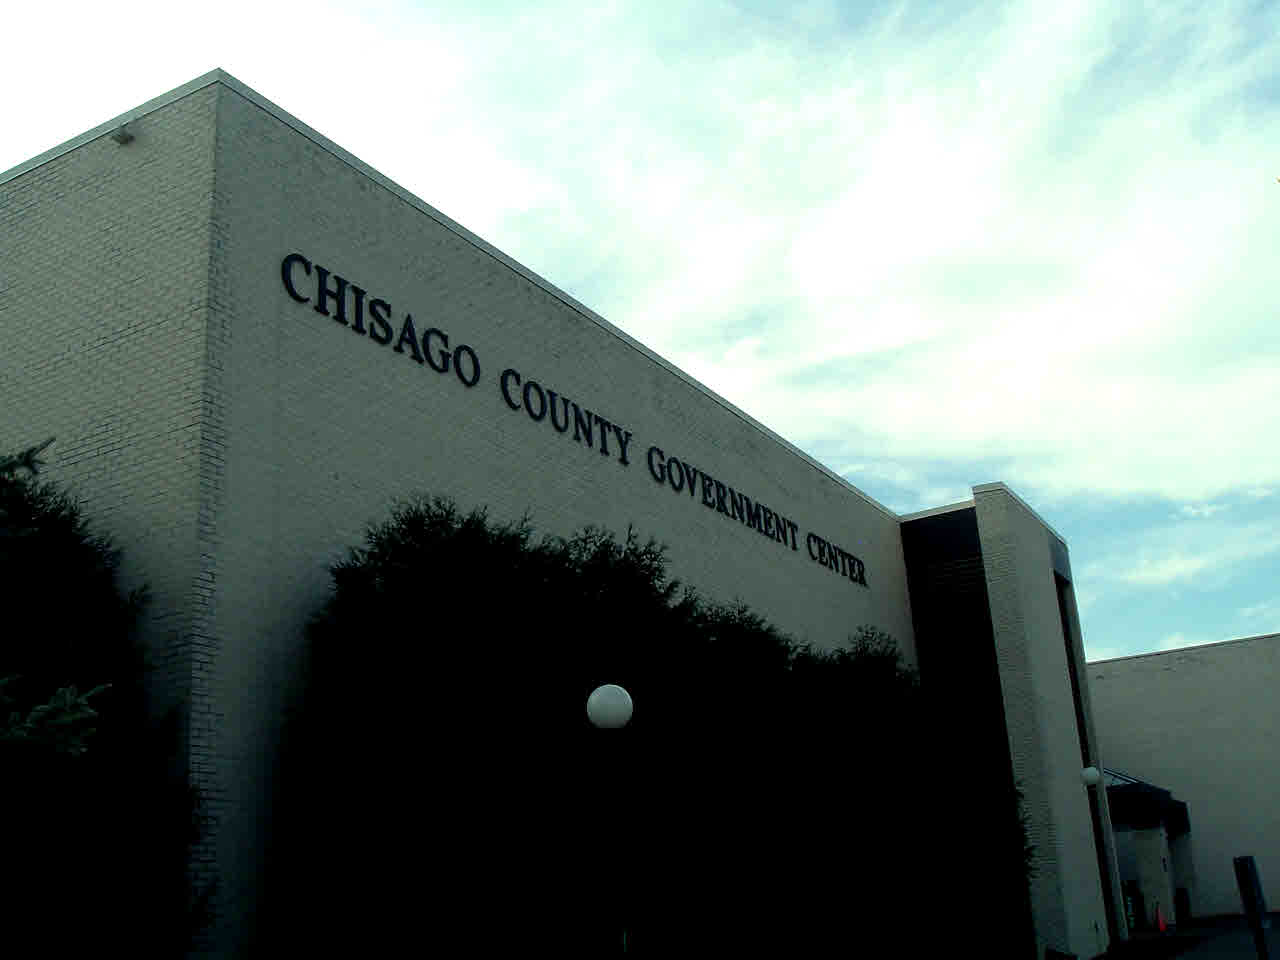 Chisago County Courthouse Gary C. Dahle, Attorney at Law